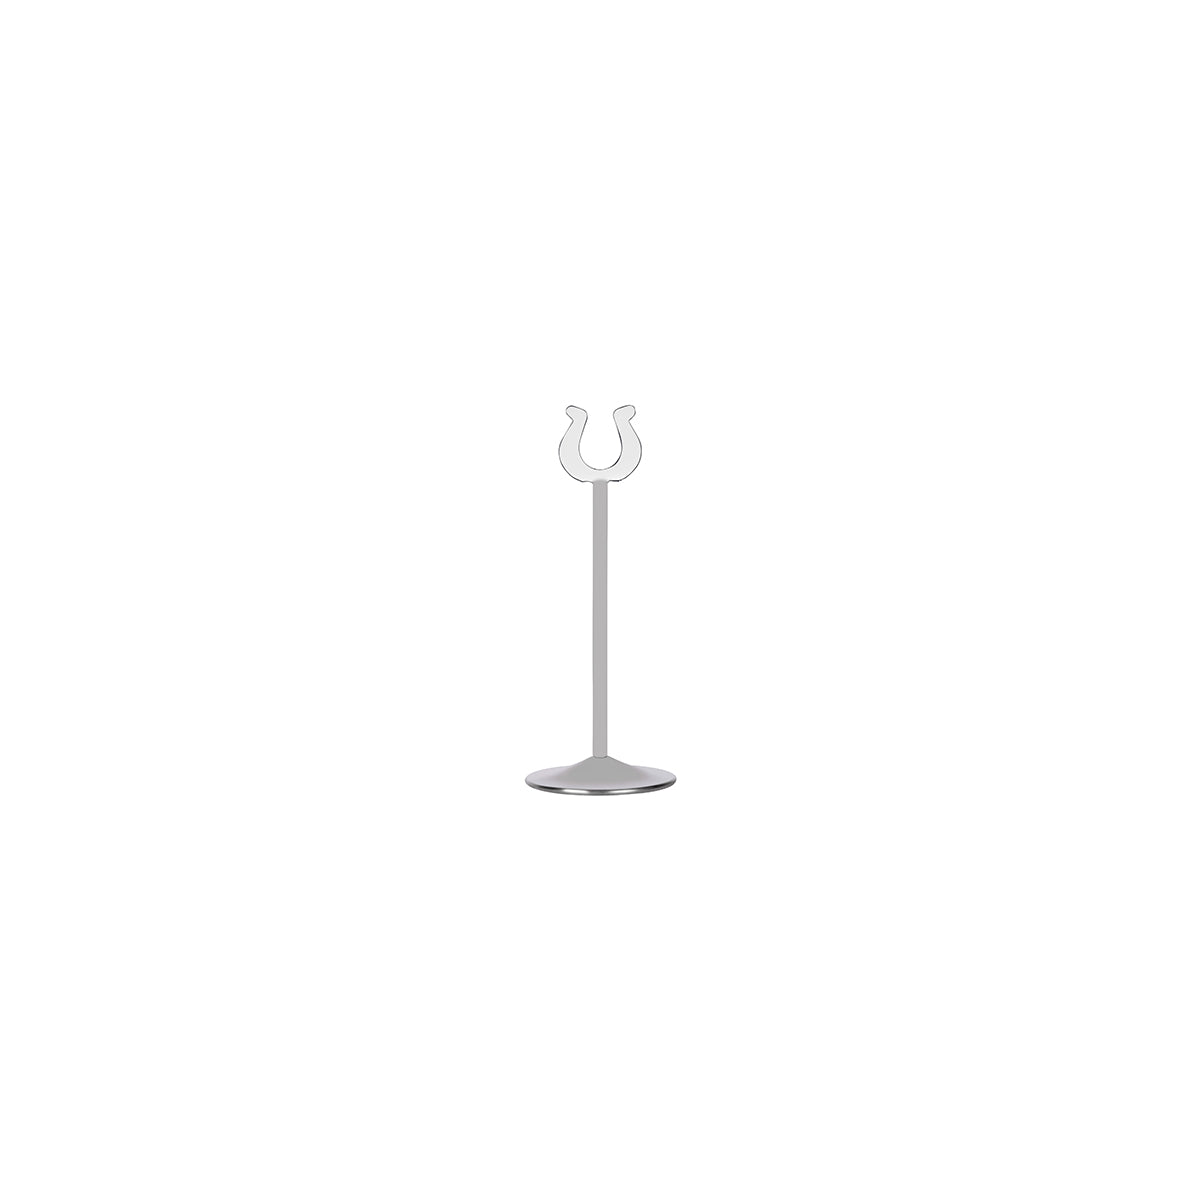 08125 Chef Inox Table Number Stand Stainless Steel 190mm Tomkin Australia Hospitality Supplies